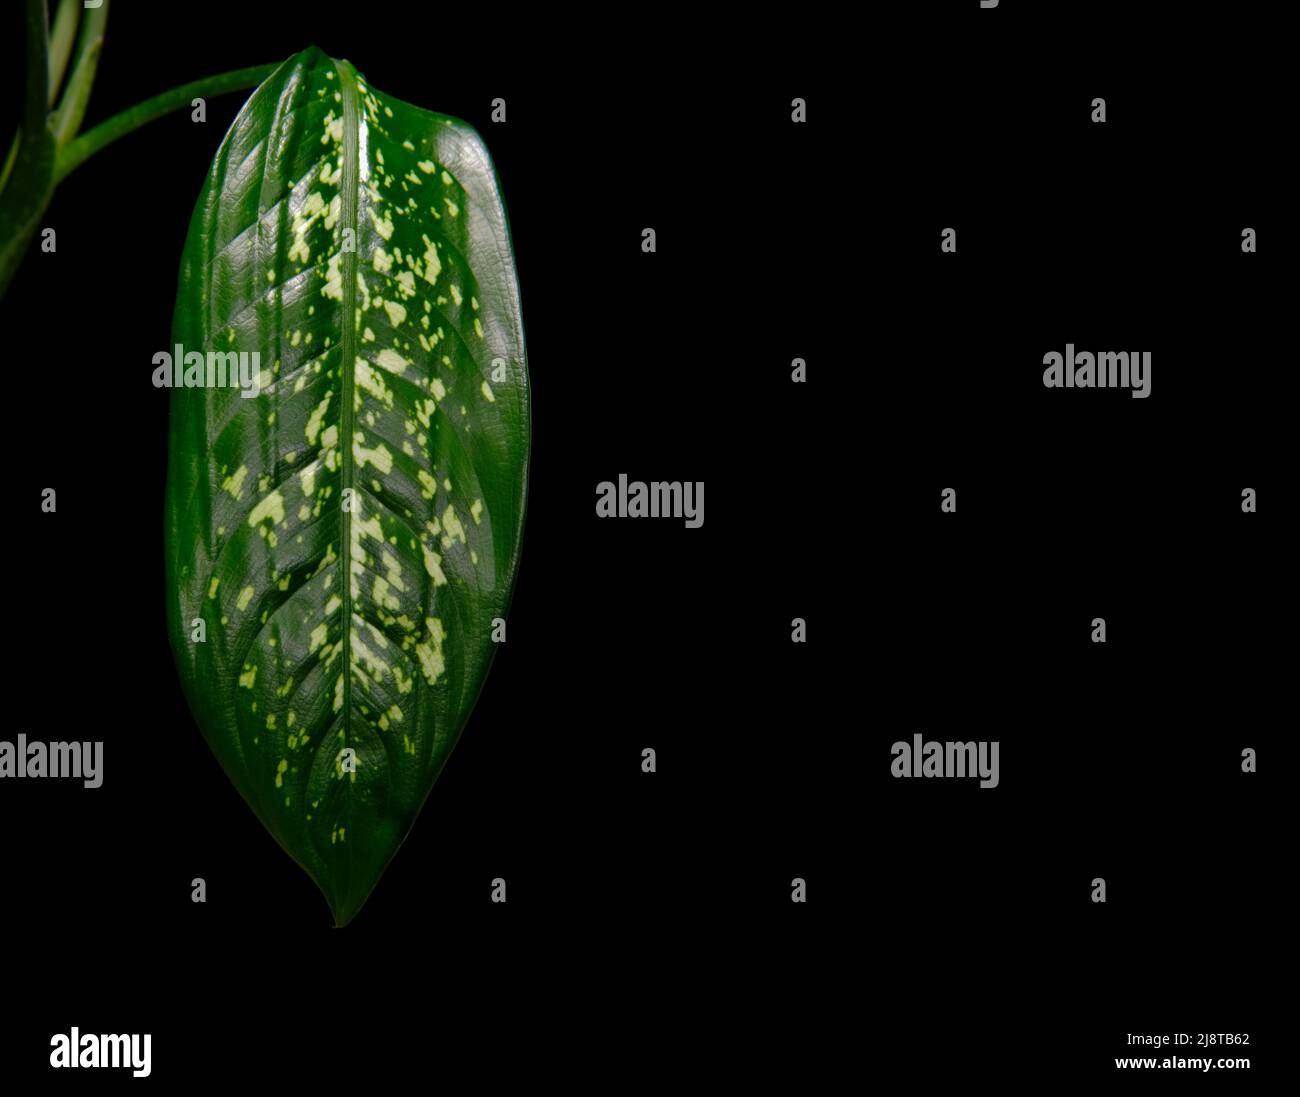 Dieffenbachia plant with large leaves on black background with copy space. Dark green leaves with white spots, close up. Fresh houseplant. Stock Photo